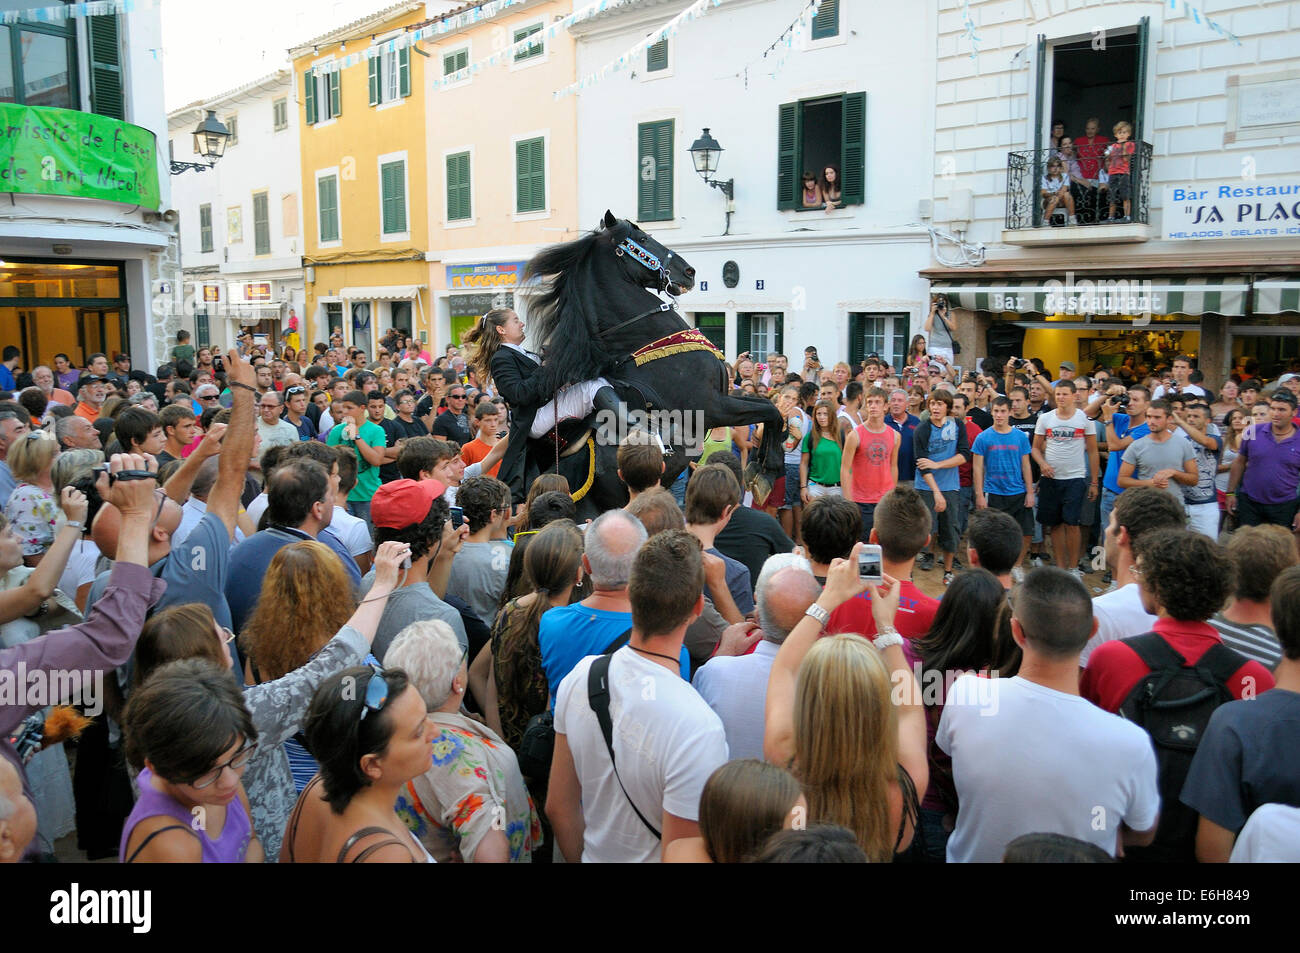 A horse rearing with a woman rider in the crowd, typical horse riding during the traditional celebration of San Nicolas in Menor Stock Photo